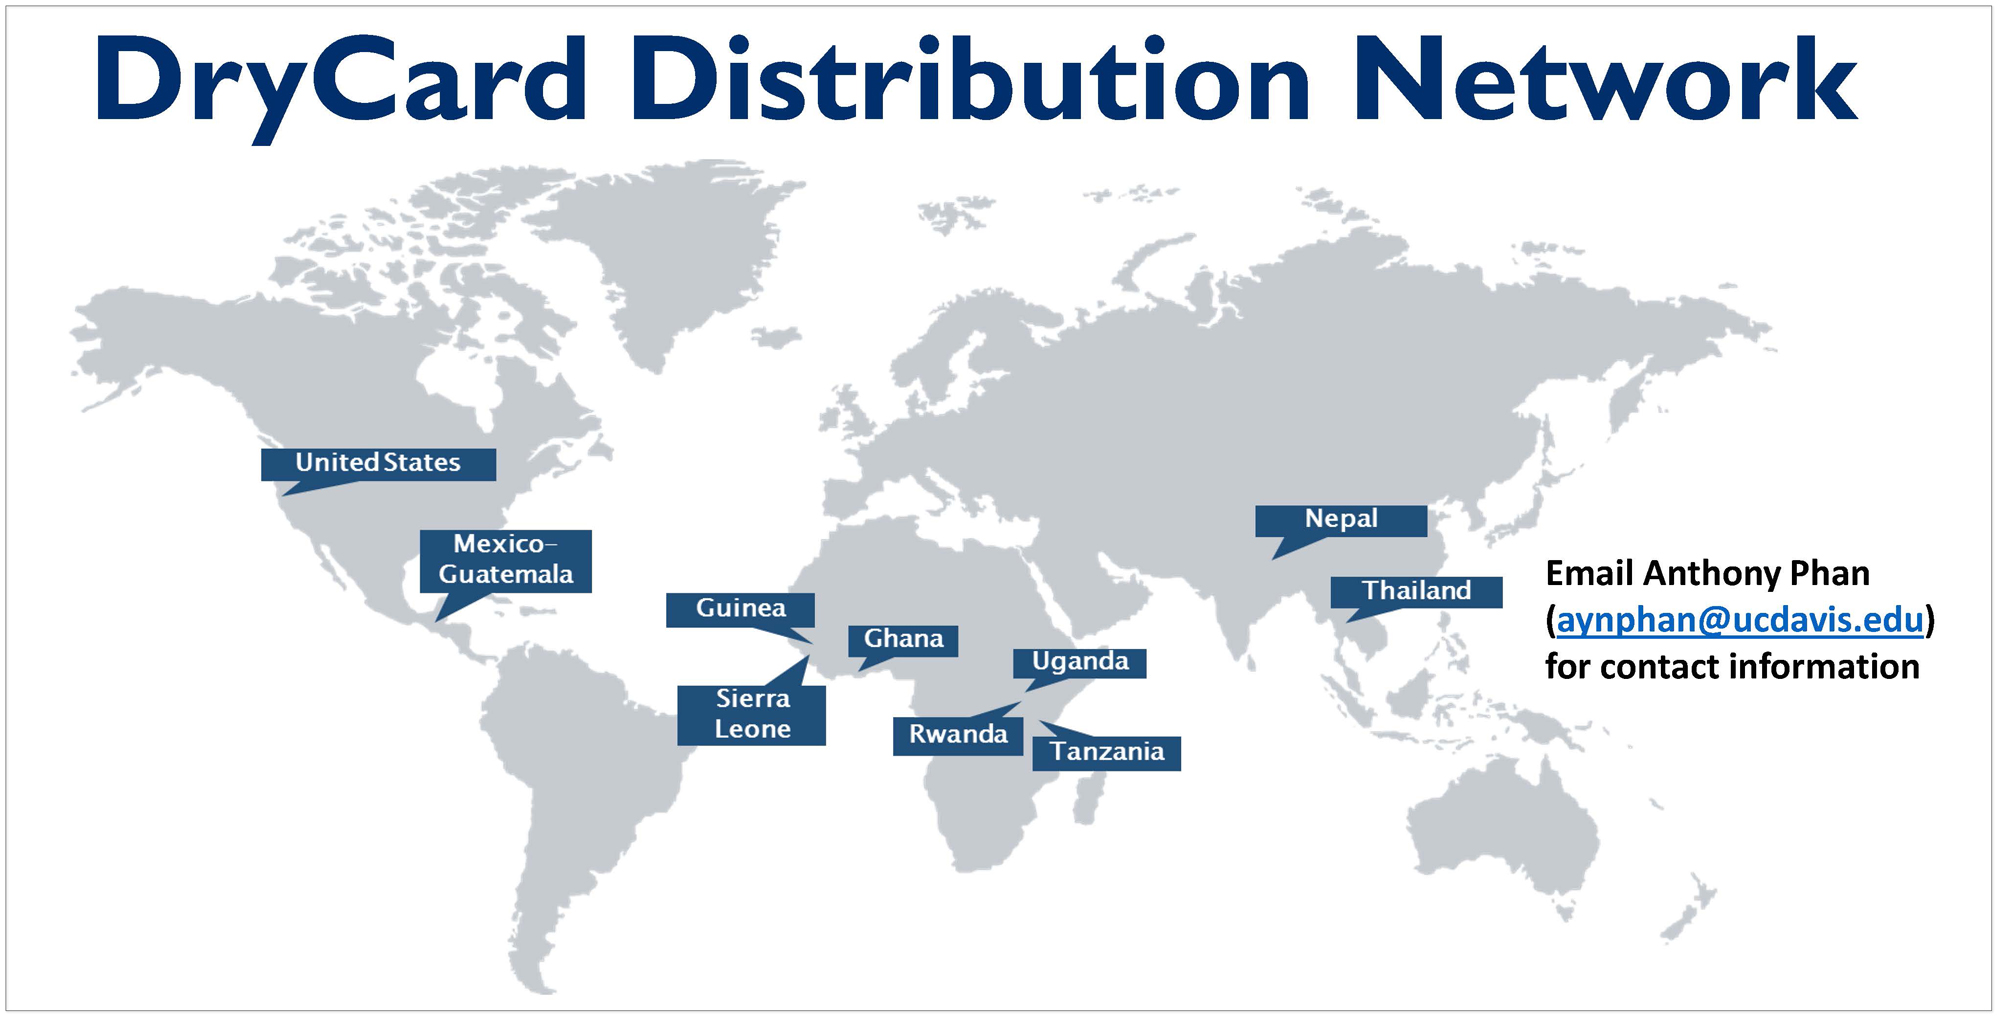 Slide shows DryCard Distribution Network map with countries labeled and 22,000+ DryCards sold